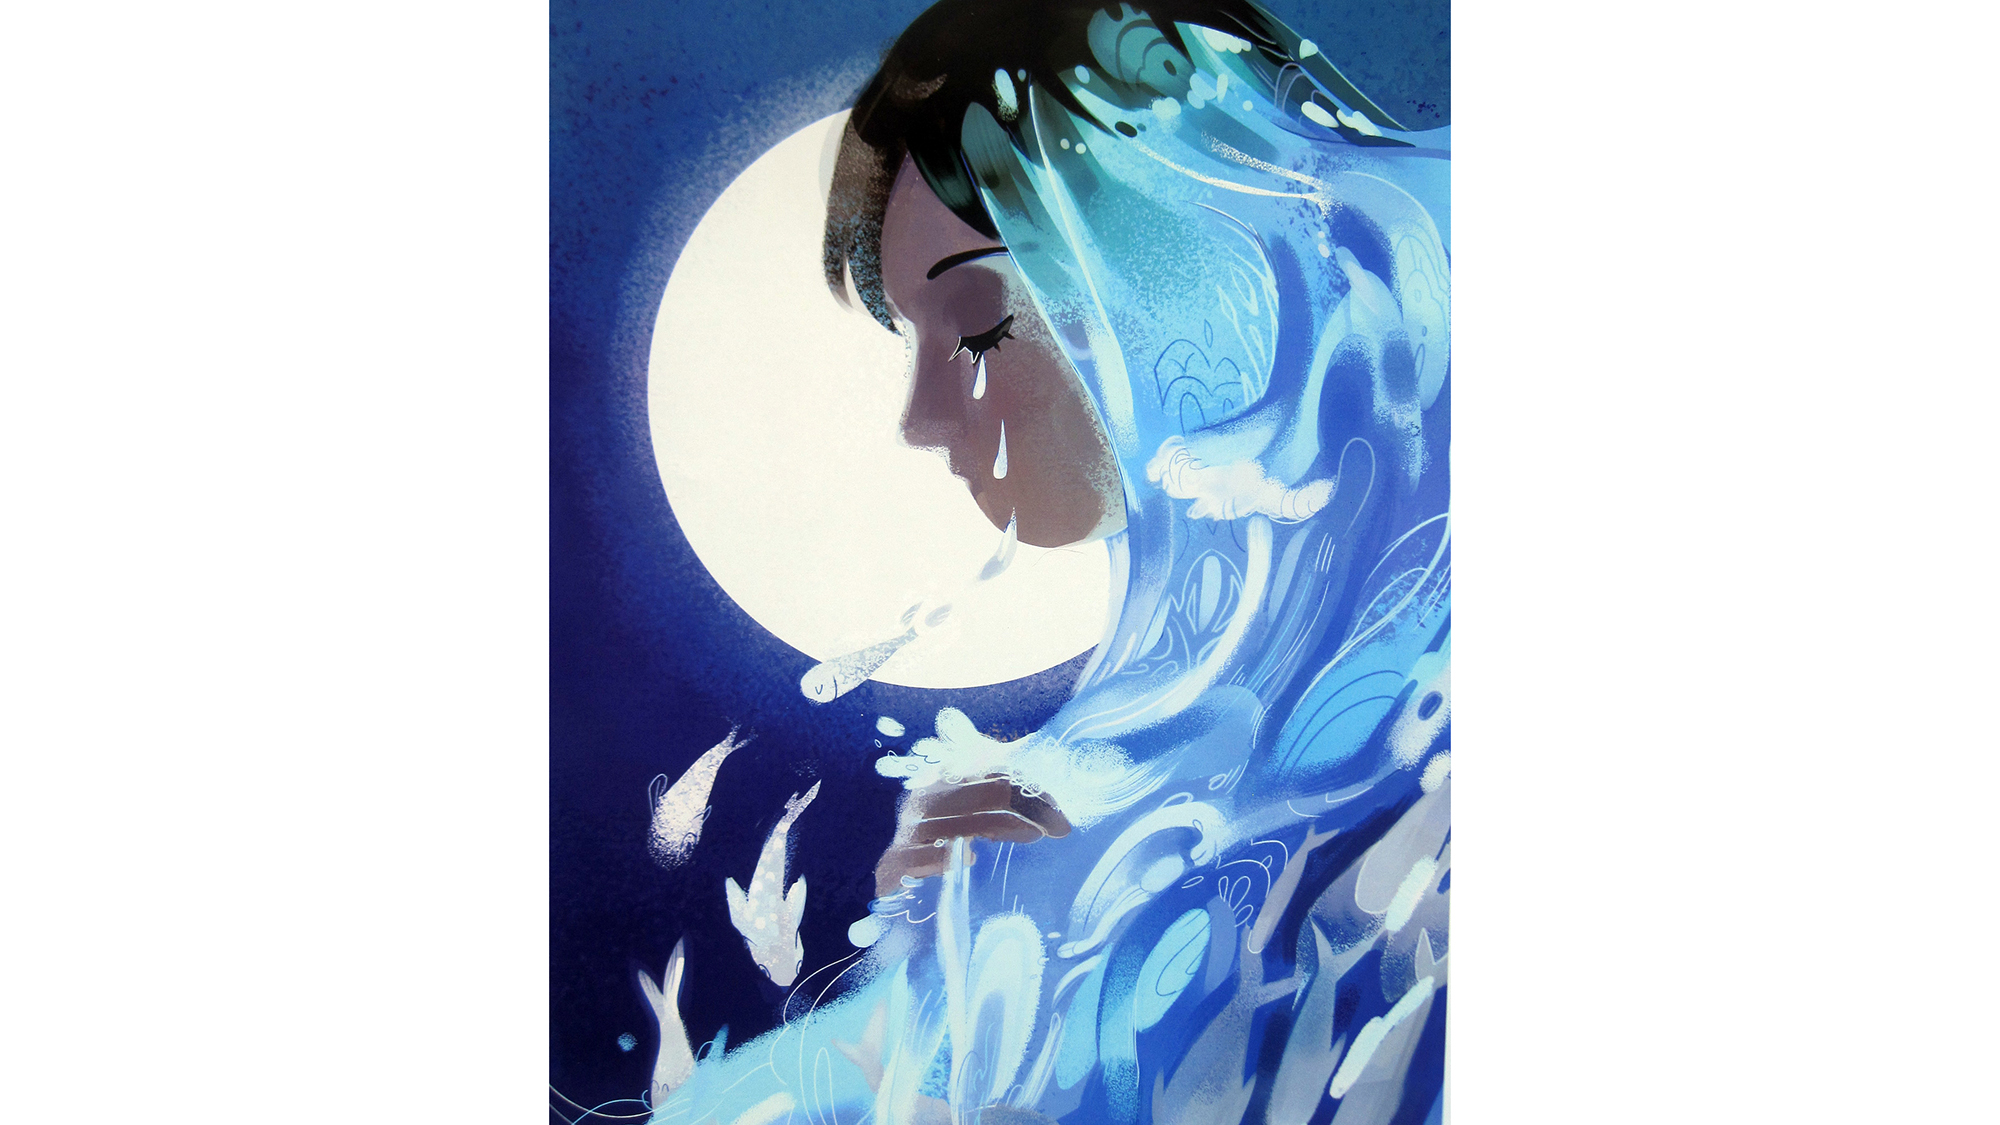 A girl with water in the foreground and the moon in the background